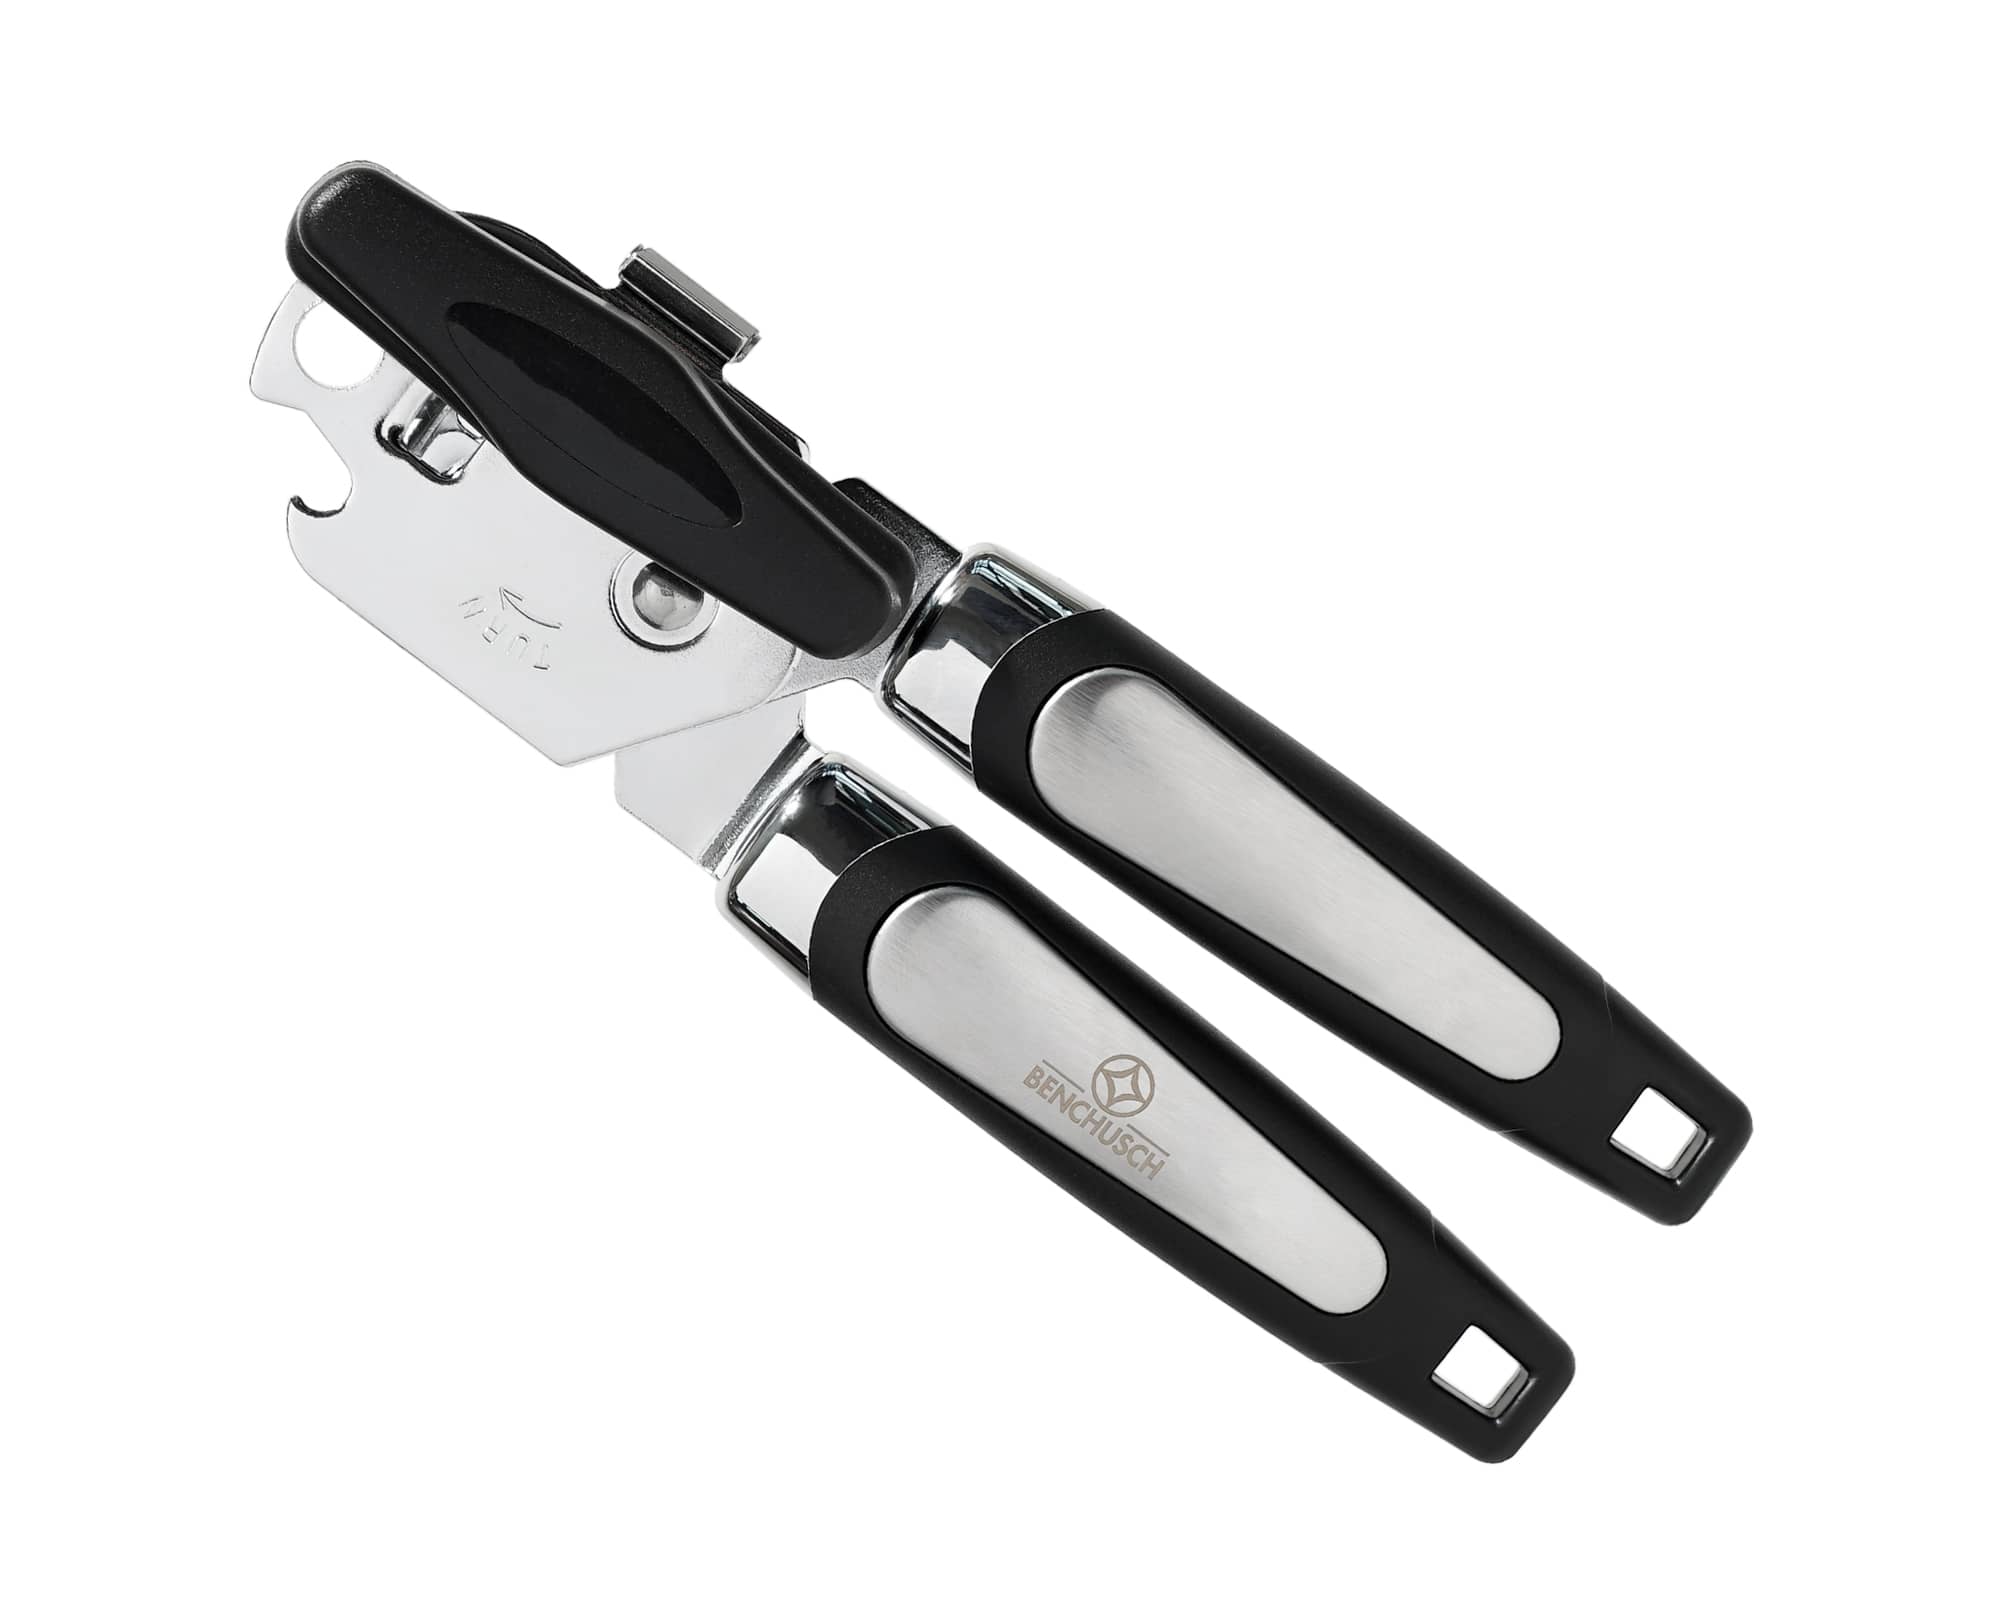 Benchusch Classia Black Can Opener with stainless steel Cutting wheel